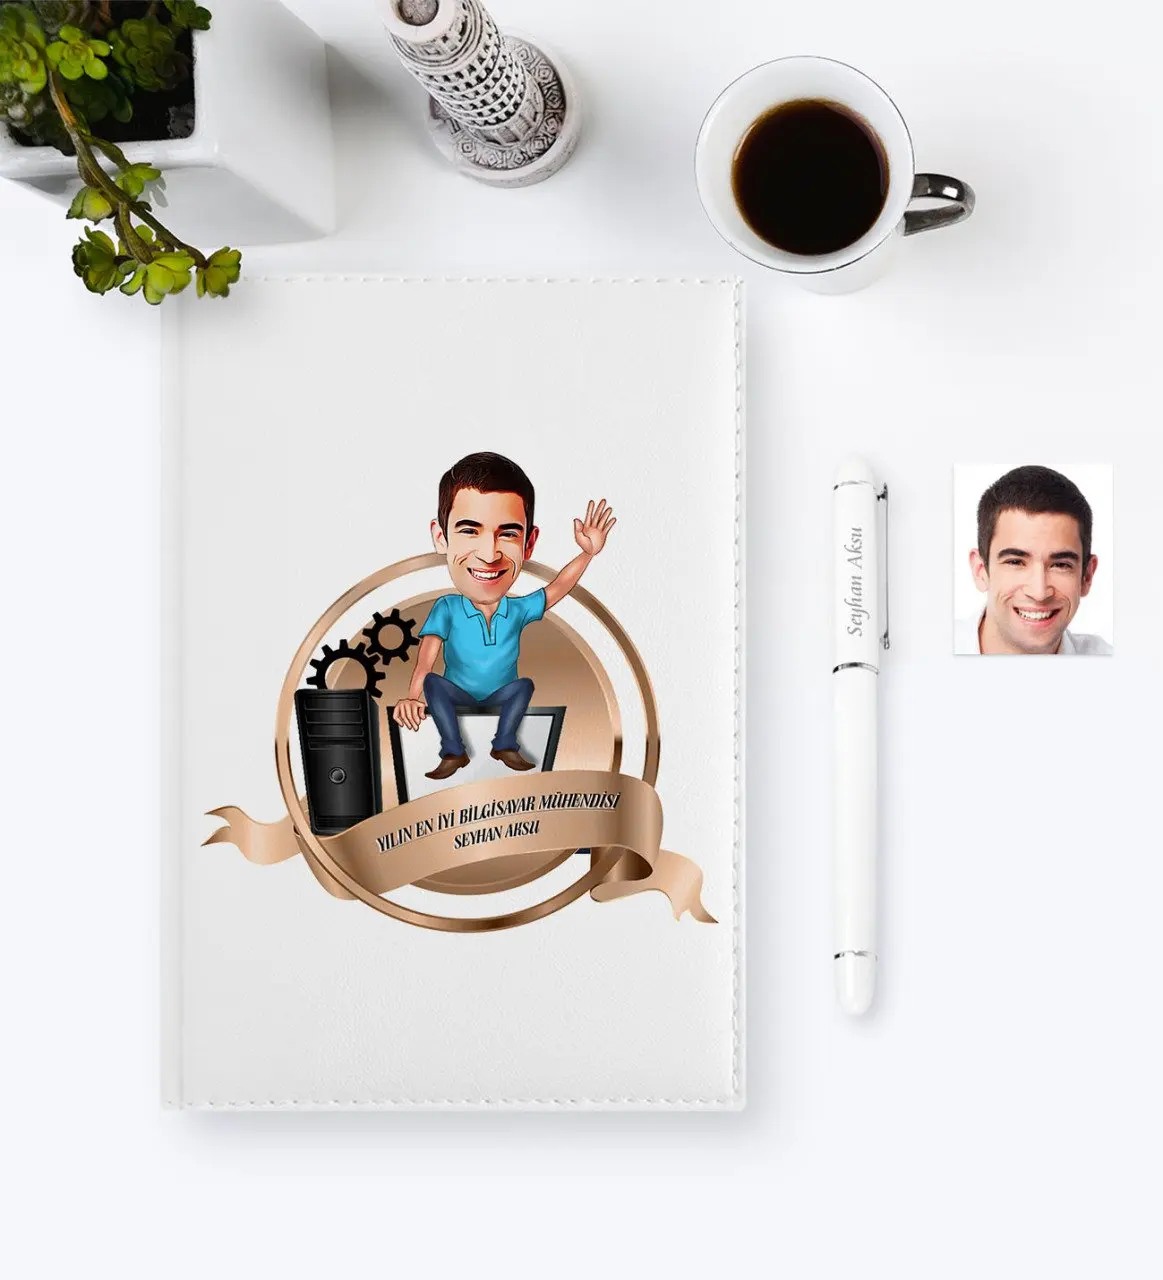 

Personalized The Year 'S Best Bay Computer Engineer Caricature of 2020 Organizer Pen set